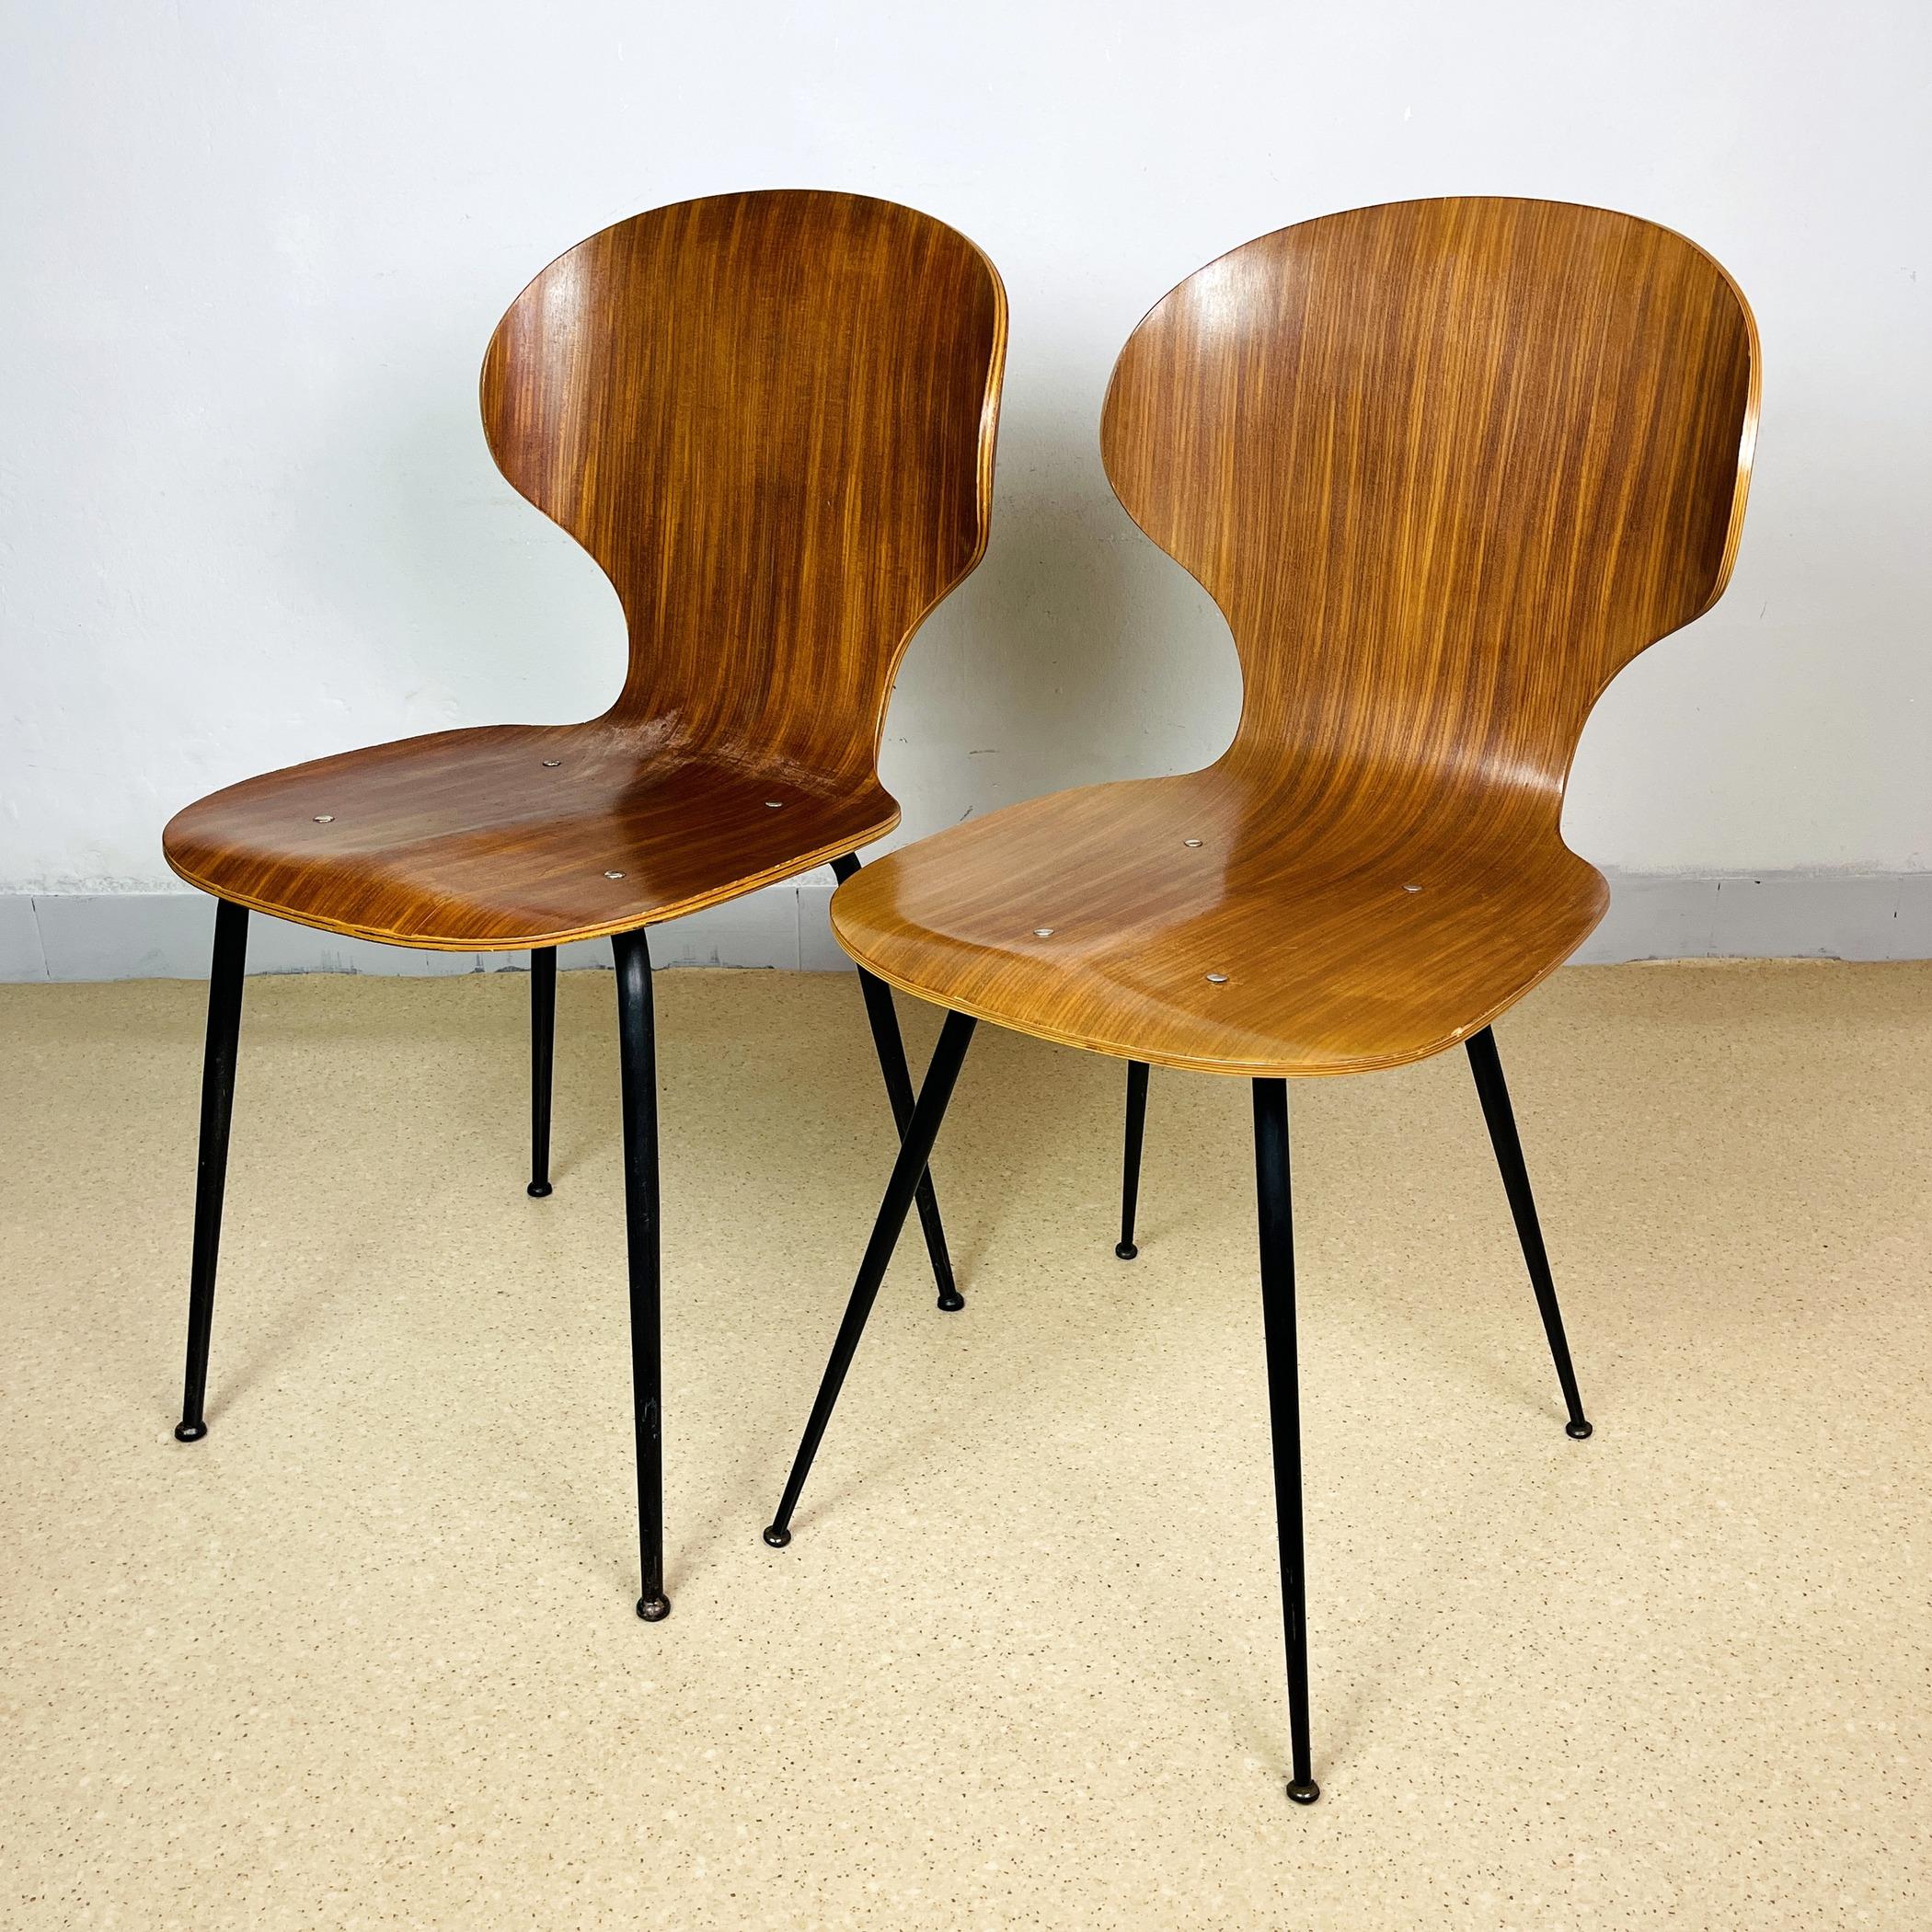 Mid-Century Modern Dining chair Lulli by Carlo Ratti for ILC Lissone Italy 70s Set of 2 For Sale